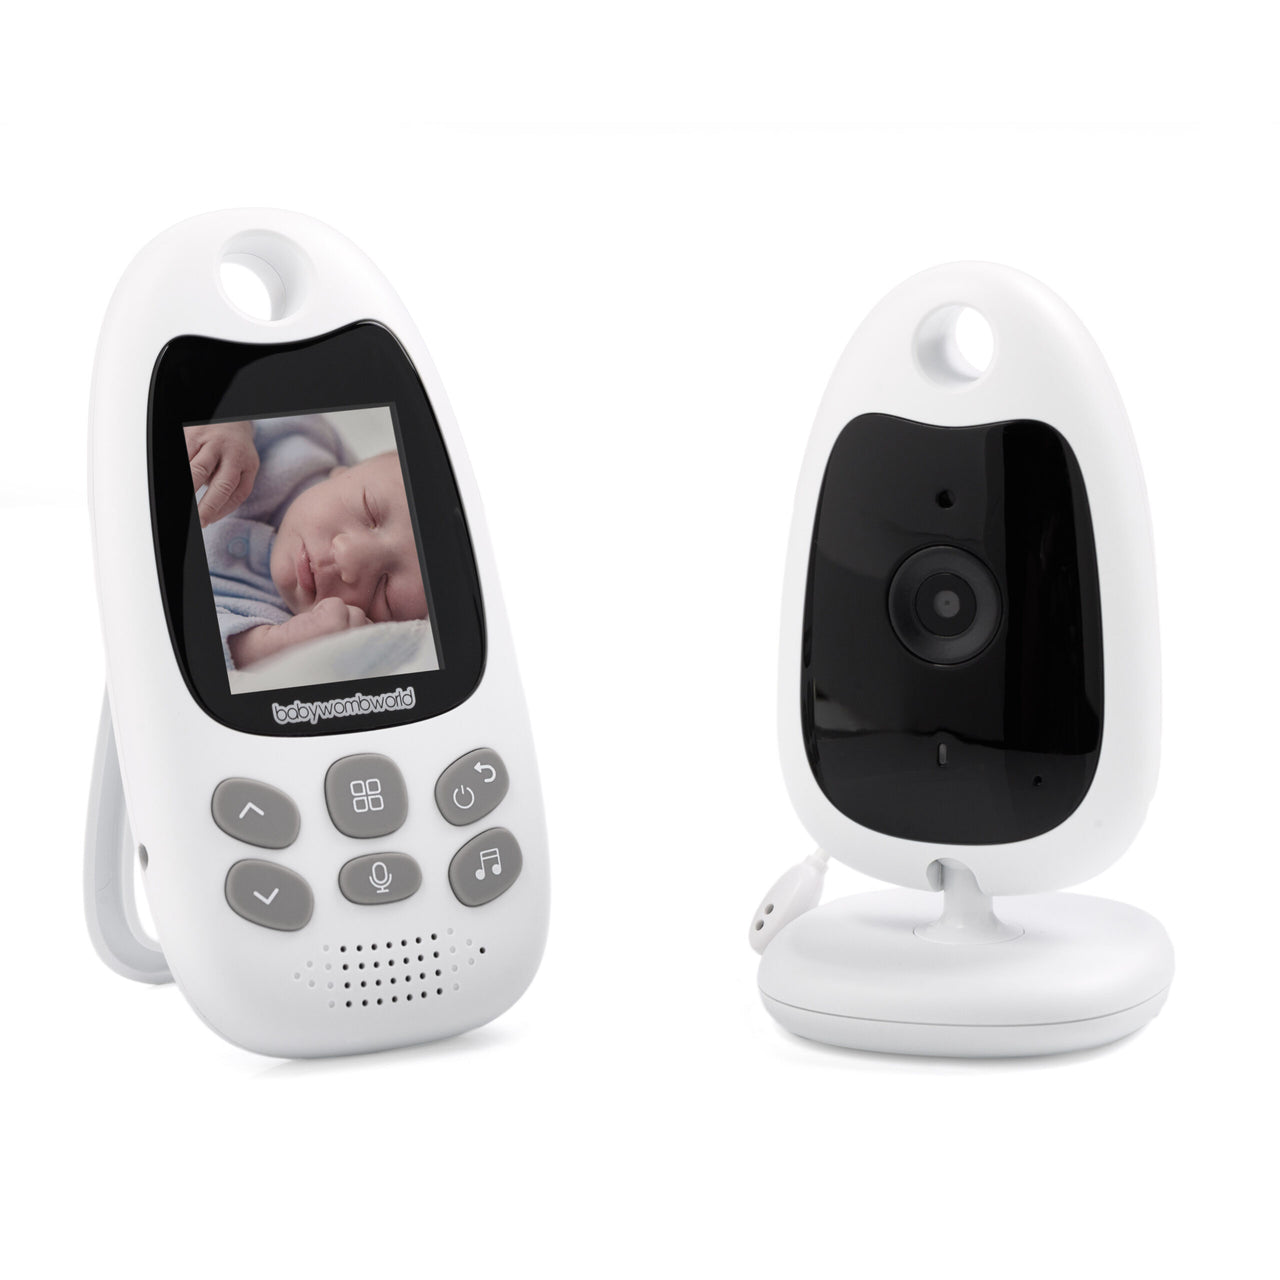 BabyWombWorld 2.0″ Video Baby Monitor with Audio and Night Vision - BWW 610